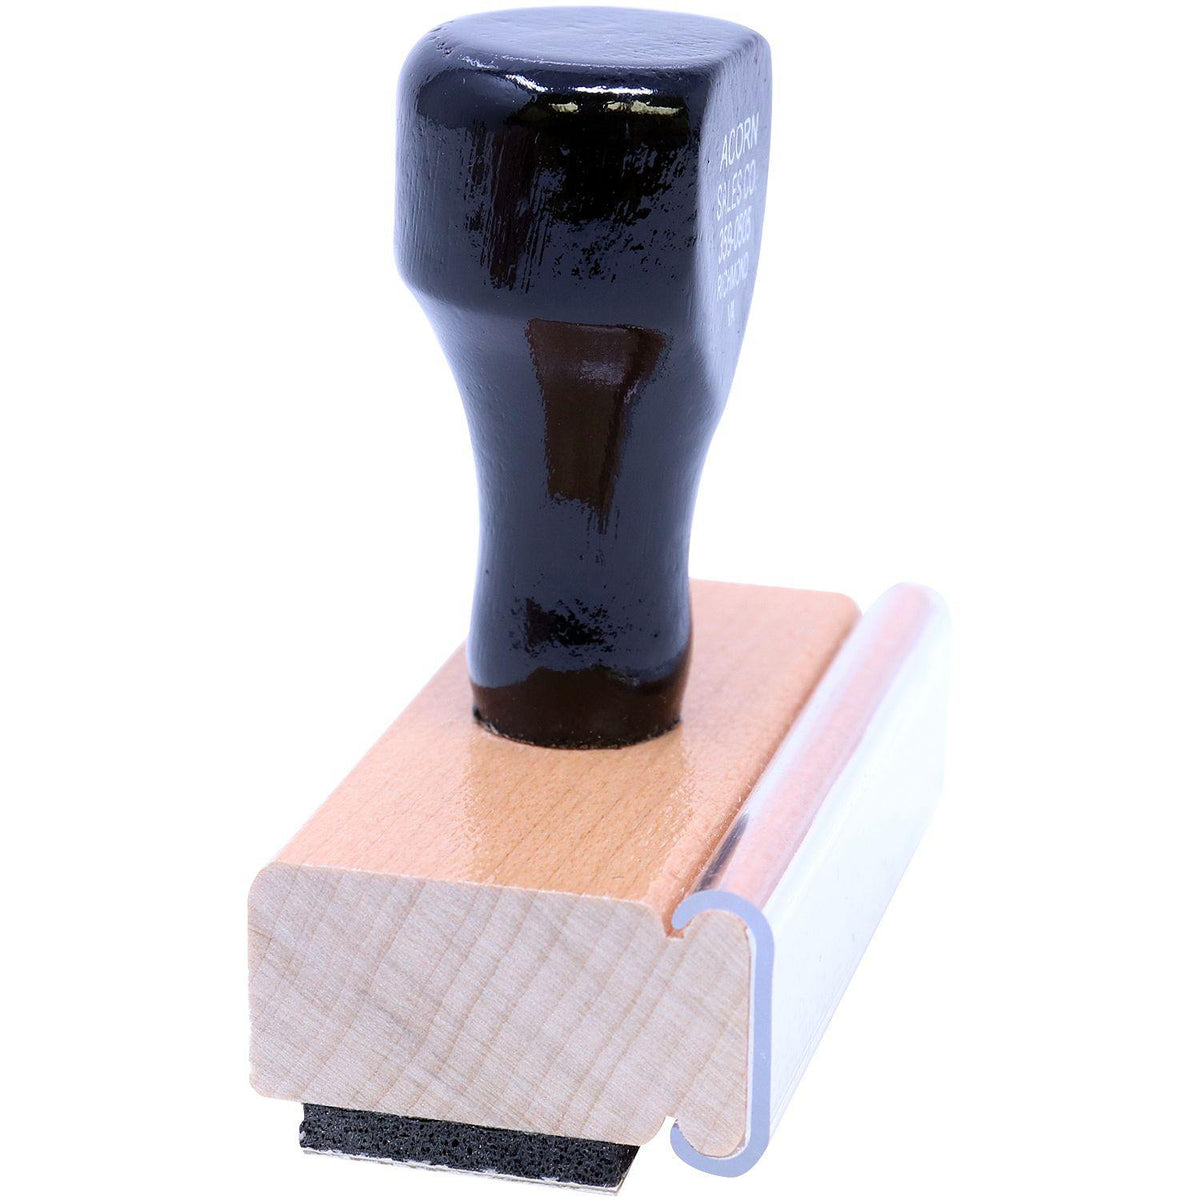 Large Shelter in Place Rubber Stamp - Engineer Seal Stamps - Brand_Acorn, Impression Size_Large, Stamp Type_Regular Stamp, Type of Use_Medical Office